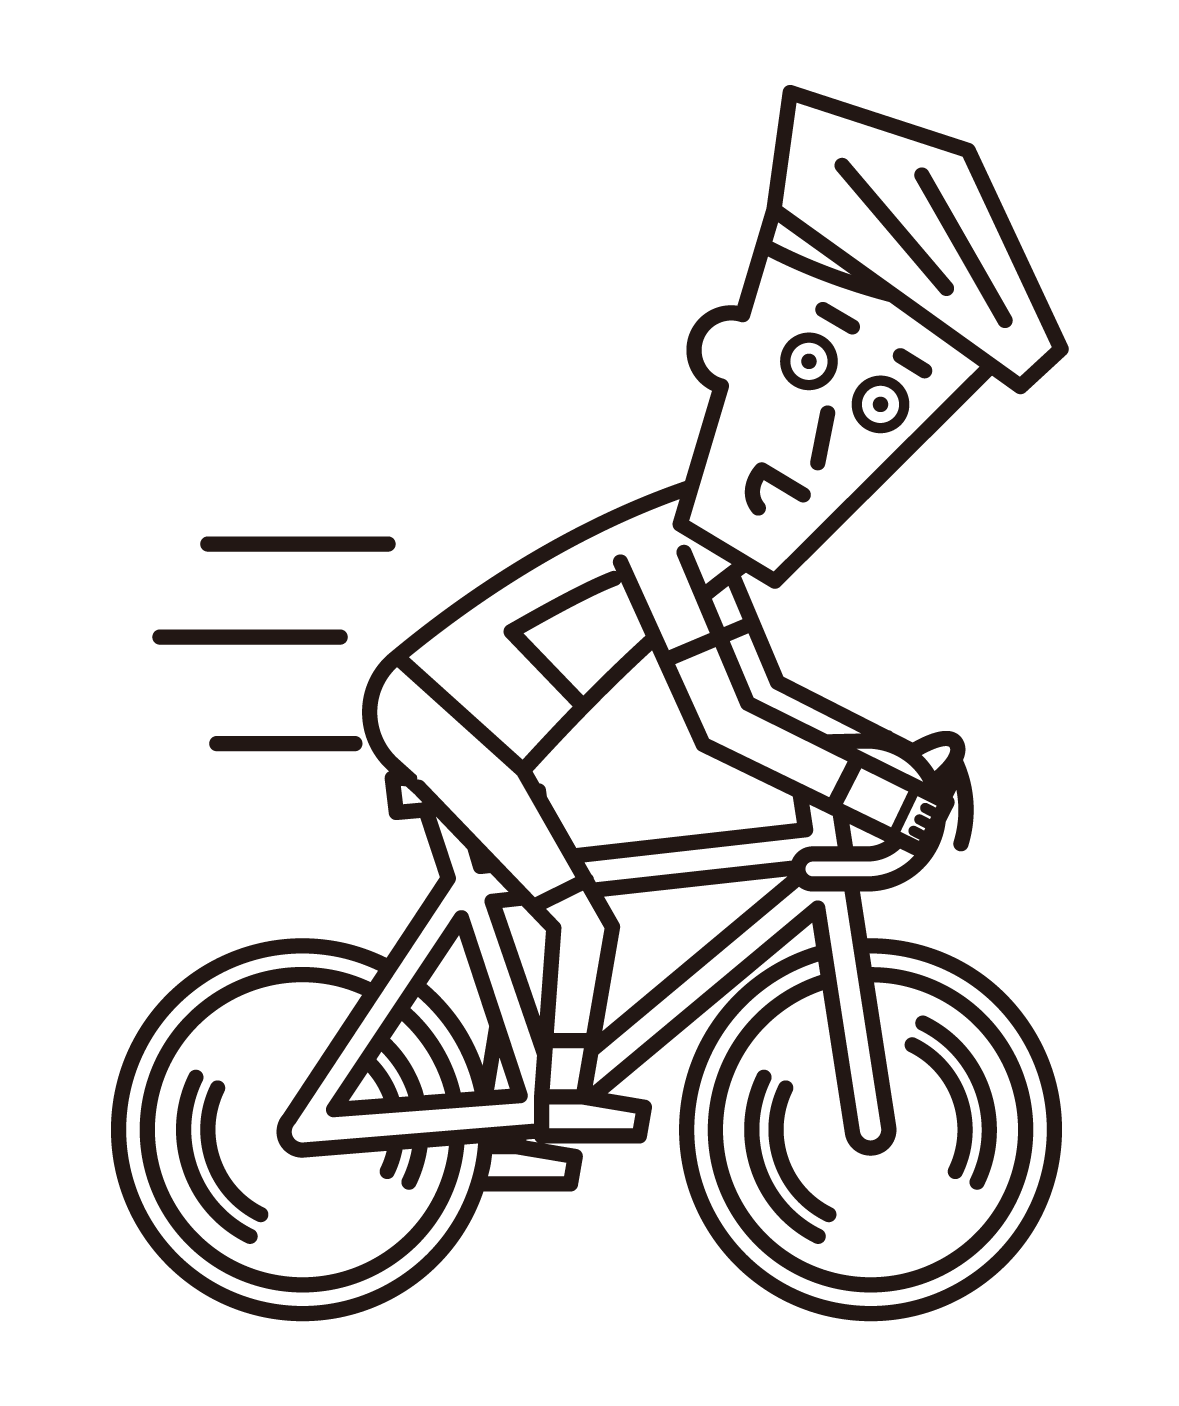 Illustration of a road race athlete (male)